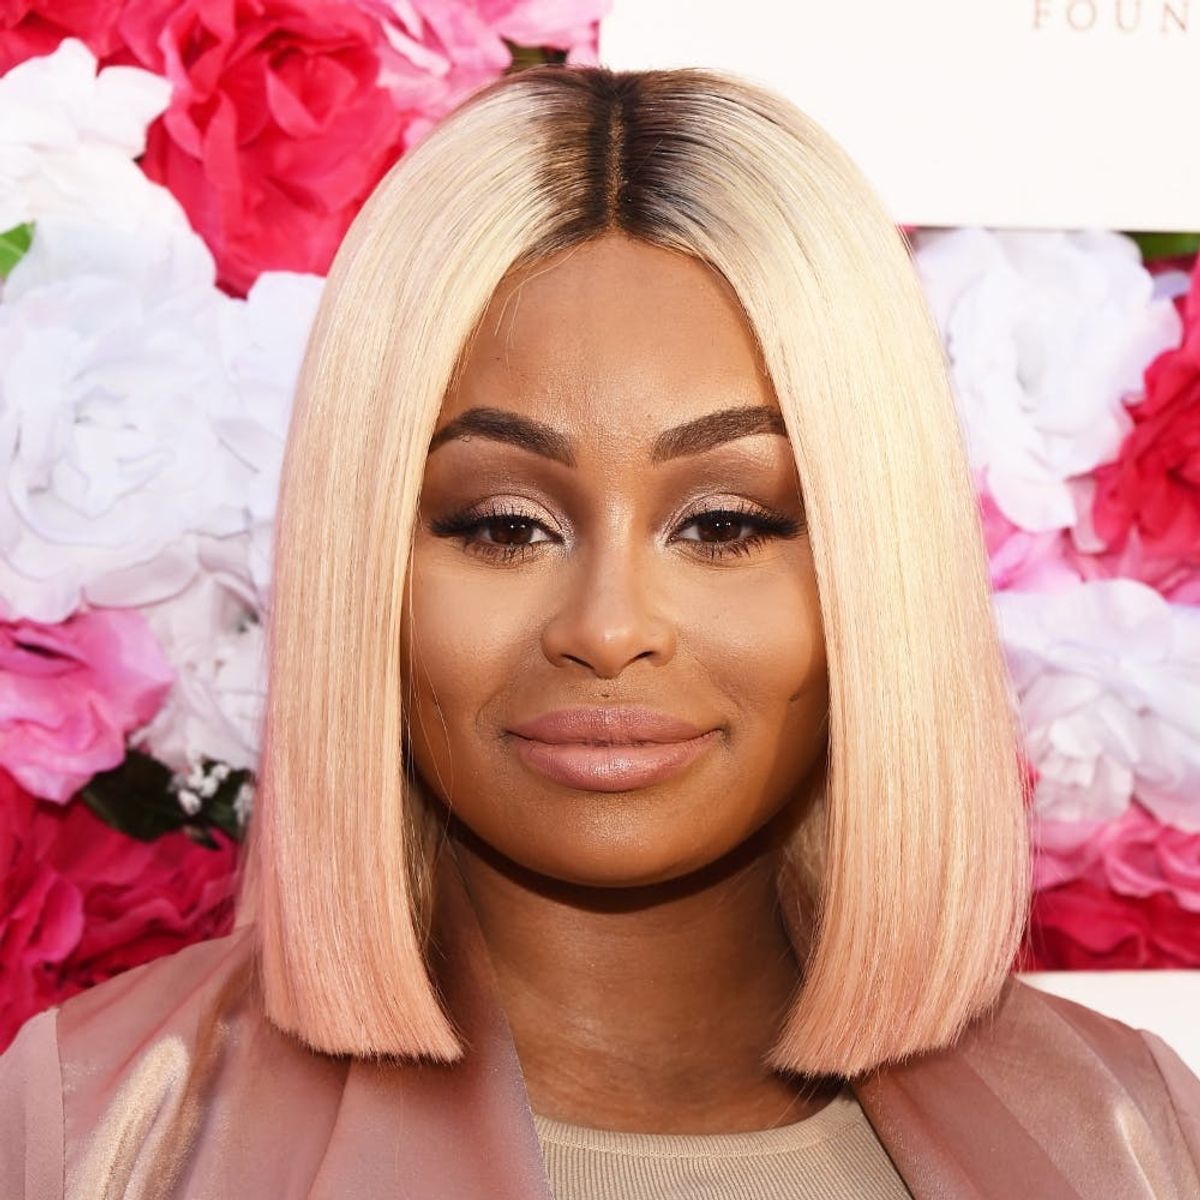 Blac Chyna Was NOT Invited to the Kardashians’ Holiday Party